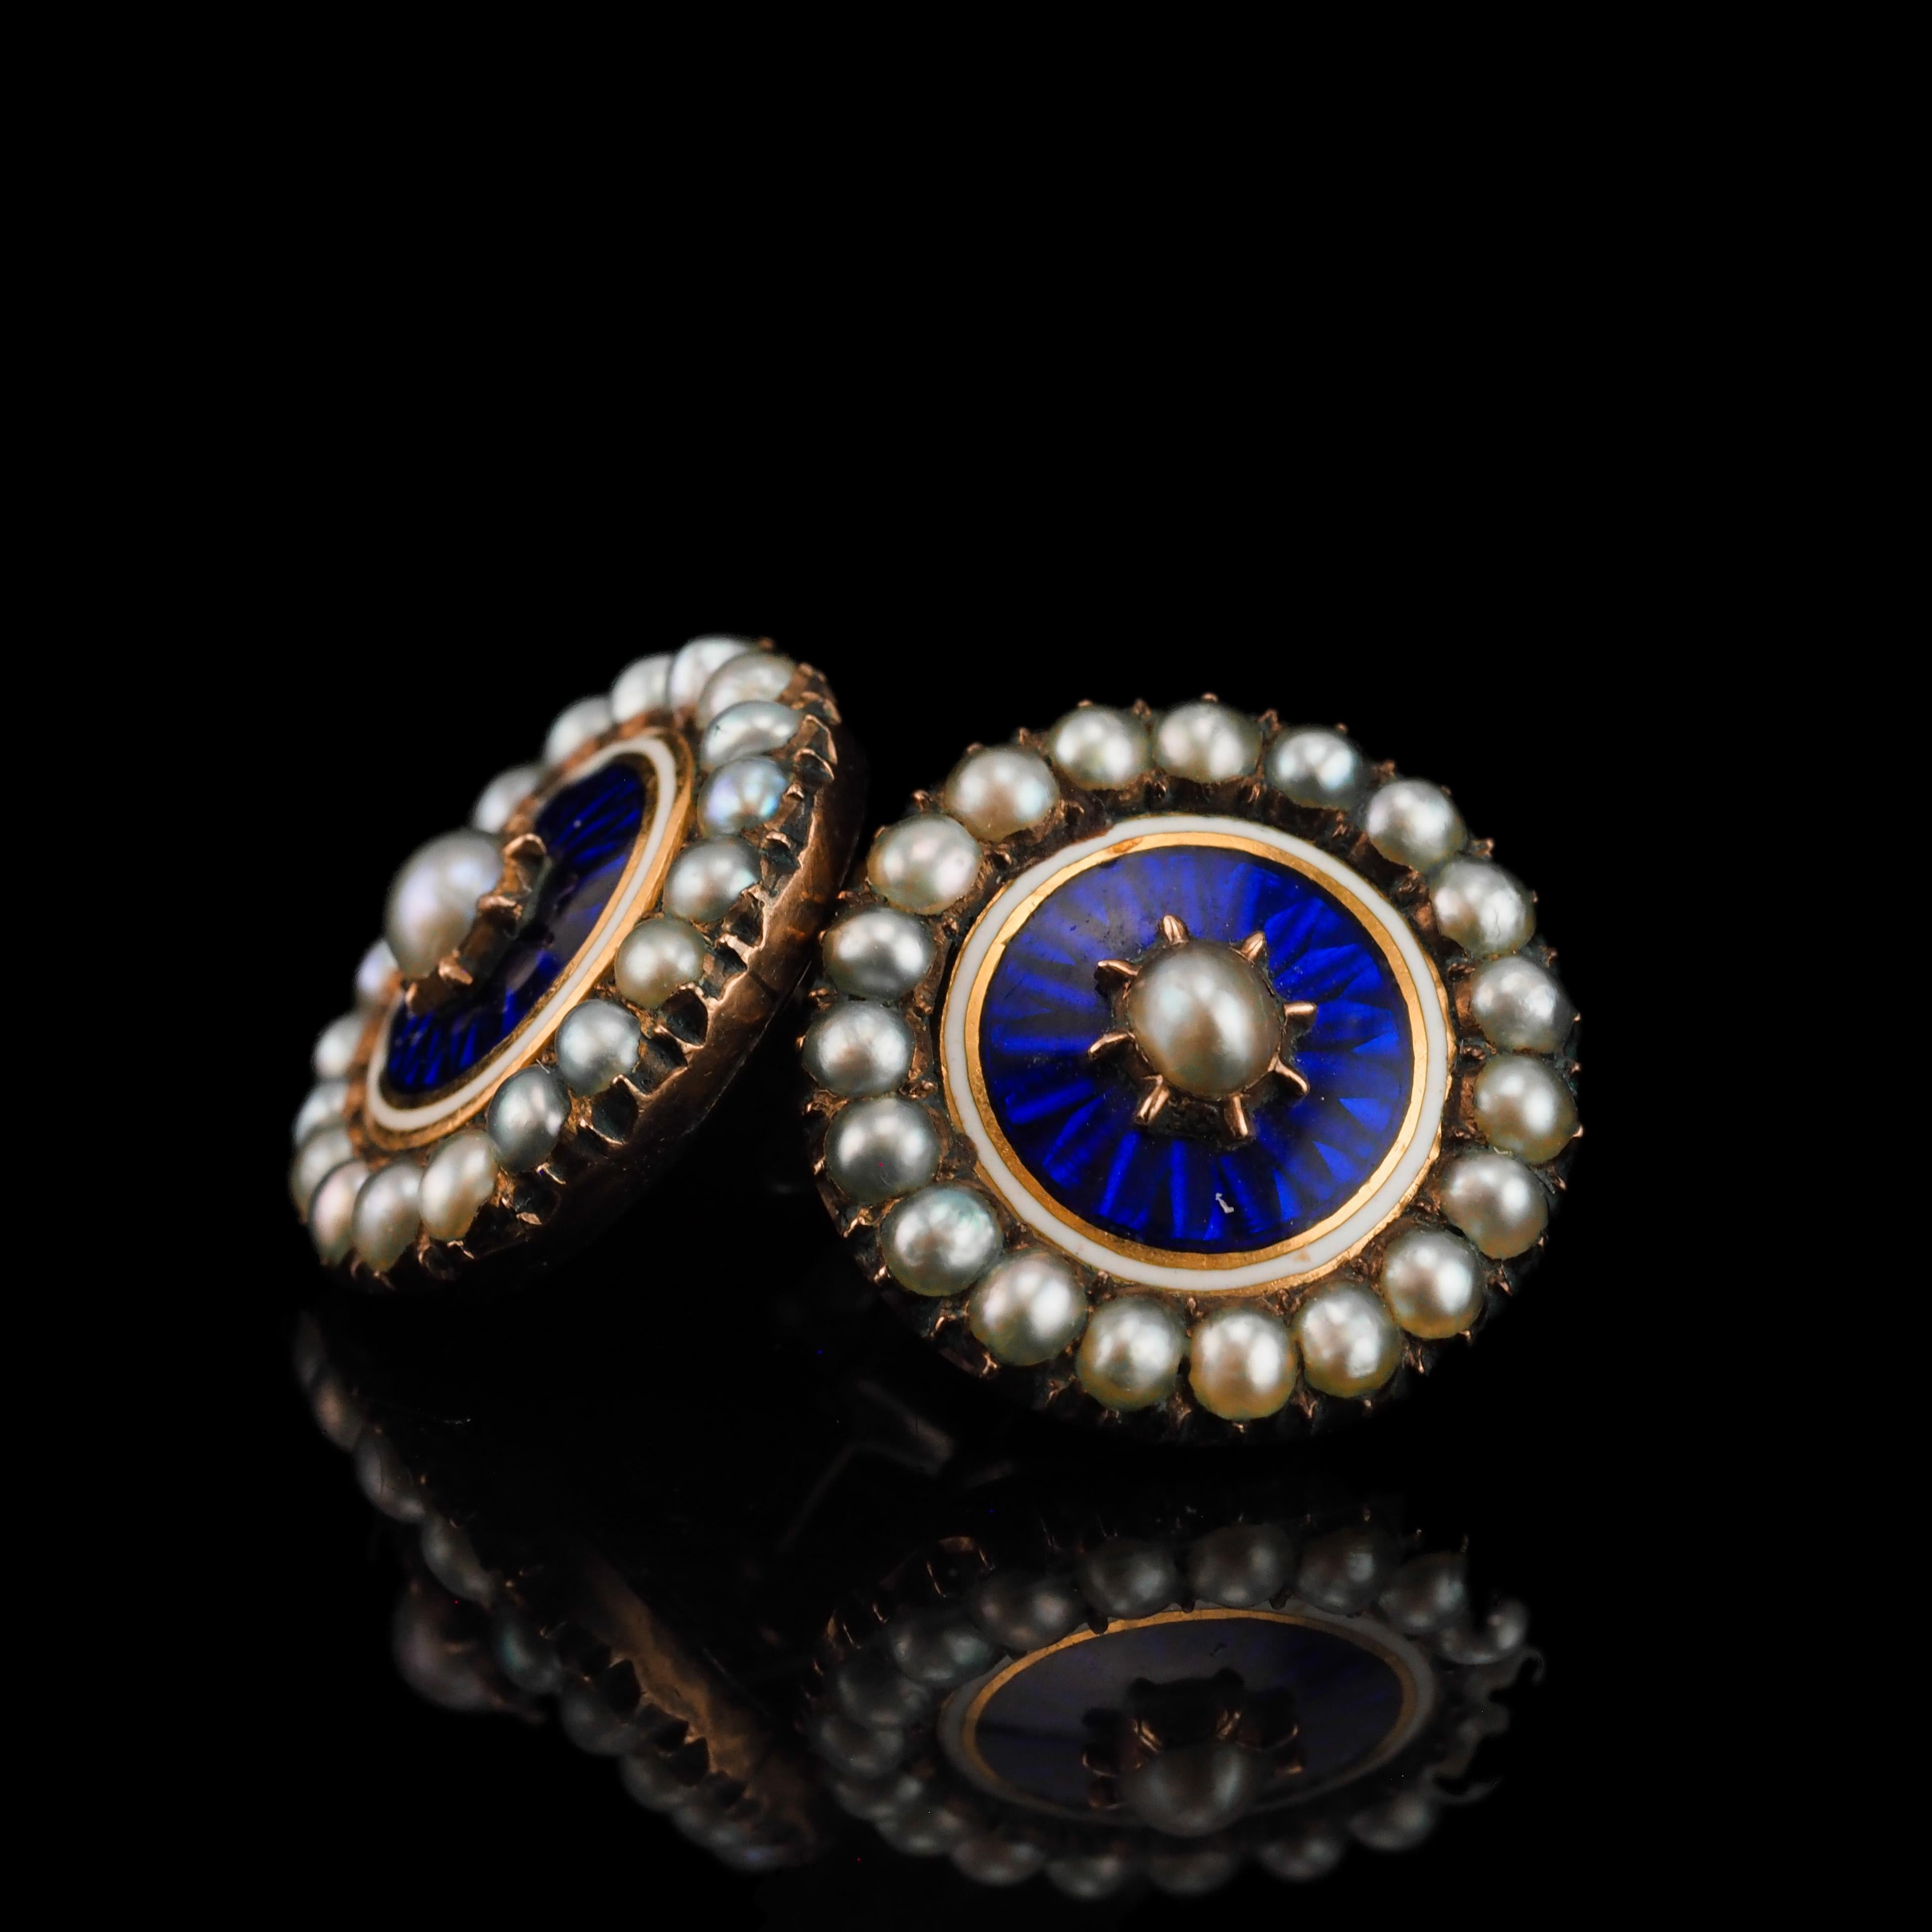 Antique Georgian Gold Earrings with Blue Enamel Guilloche Pearl Cluster c.1800 For Sale 9